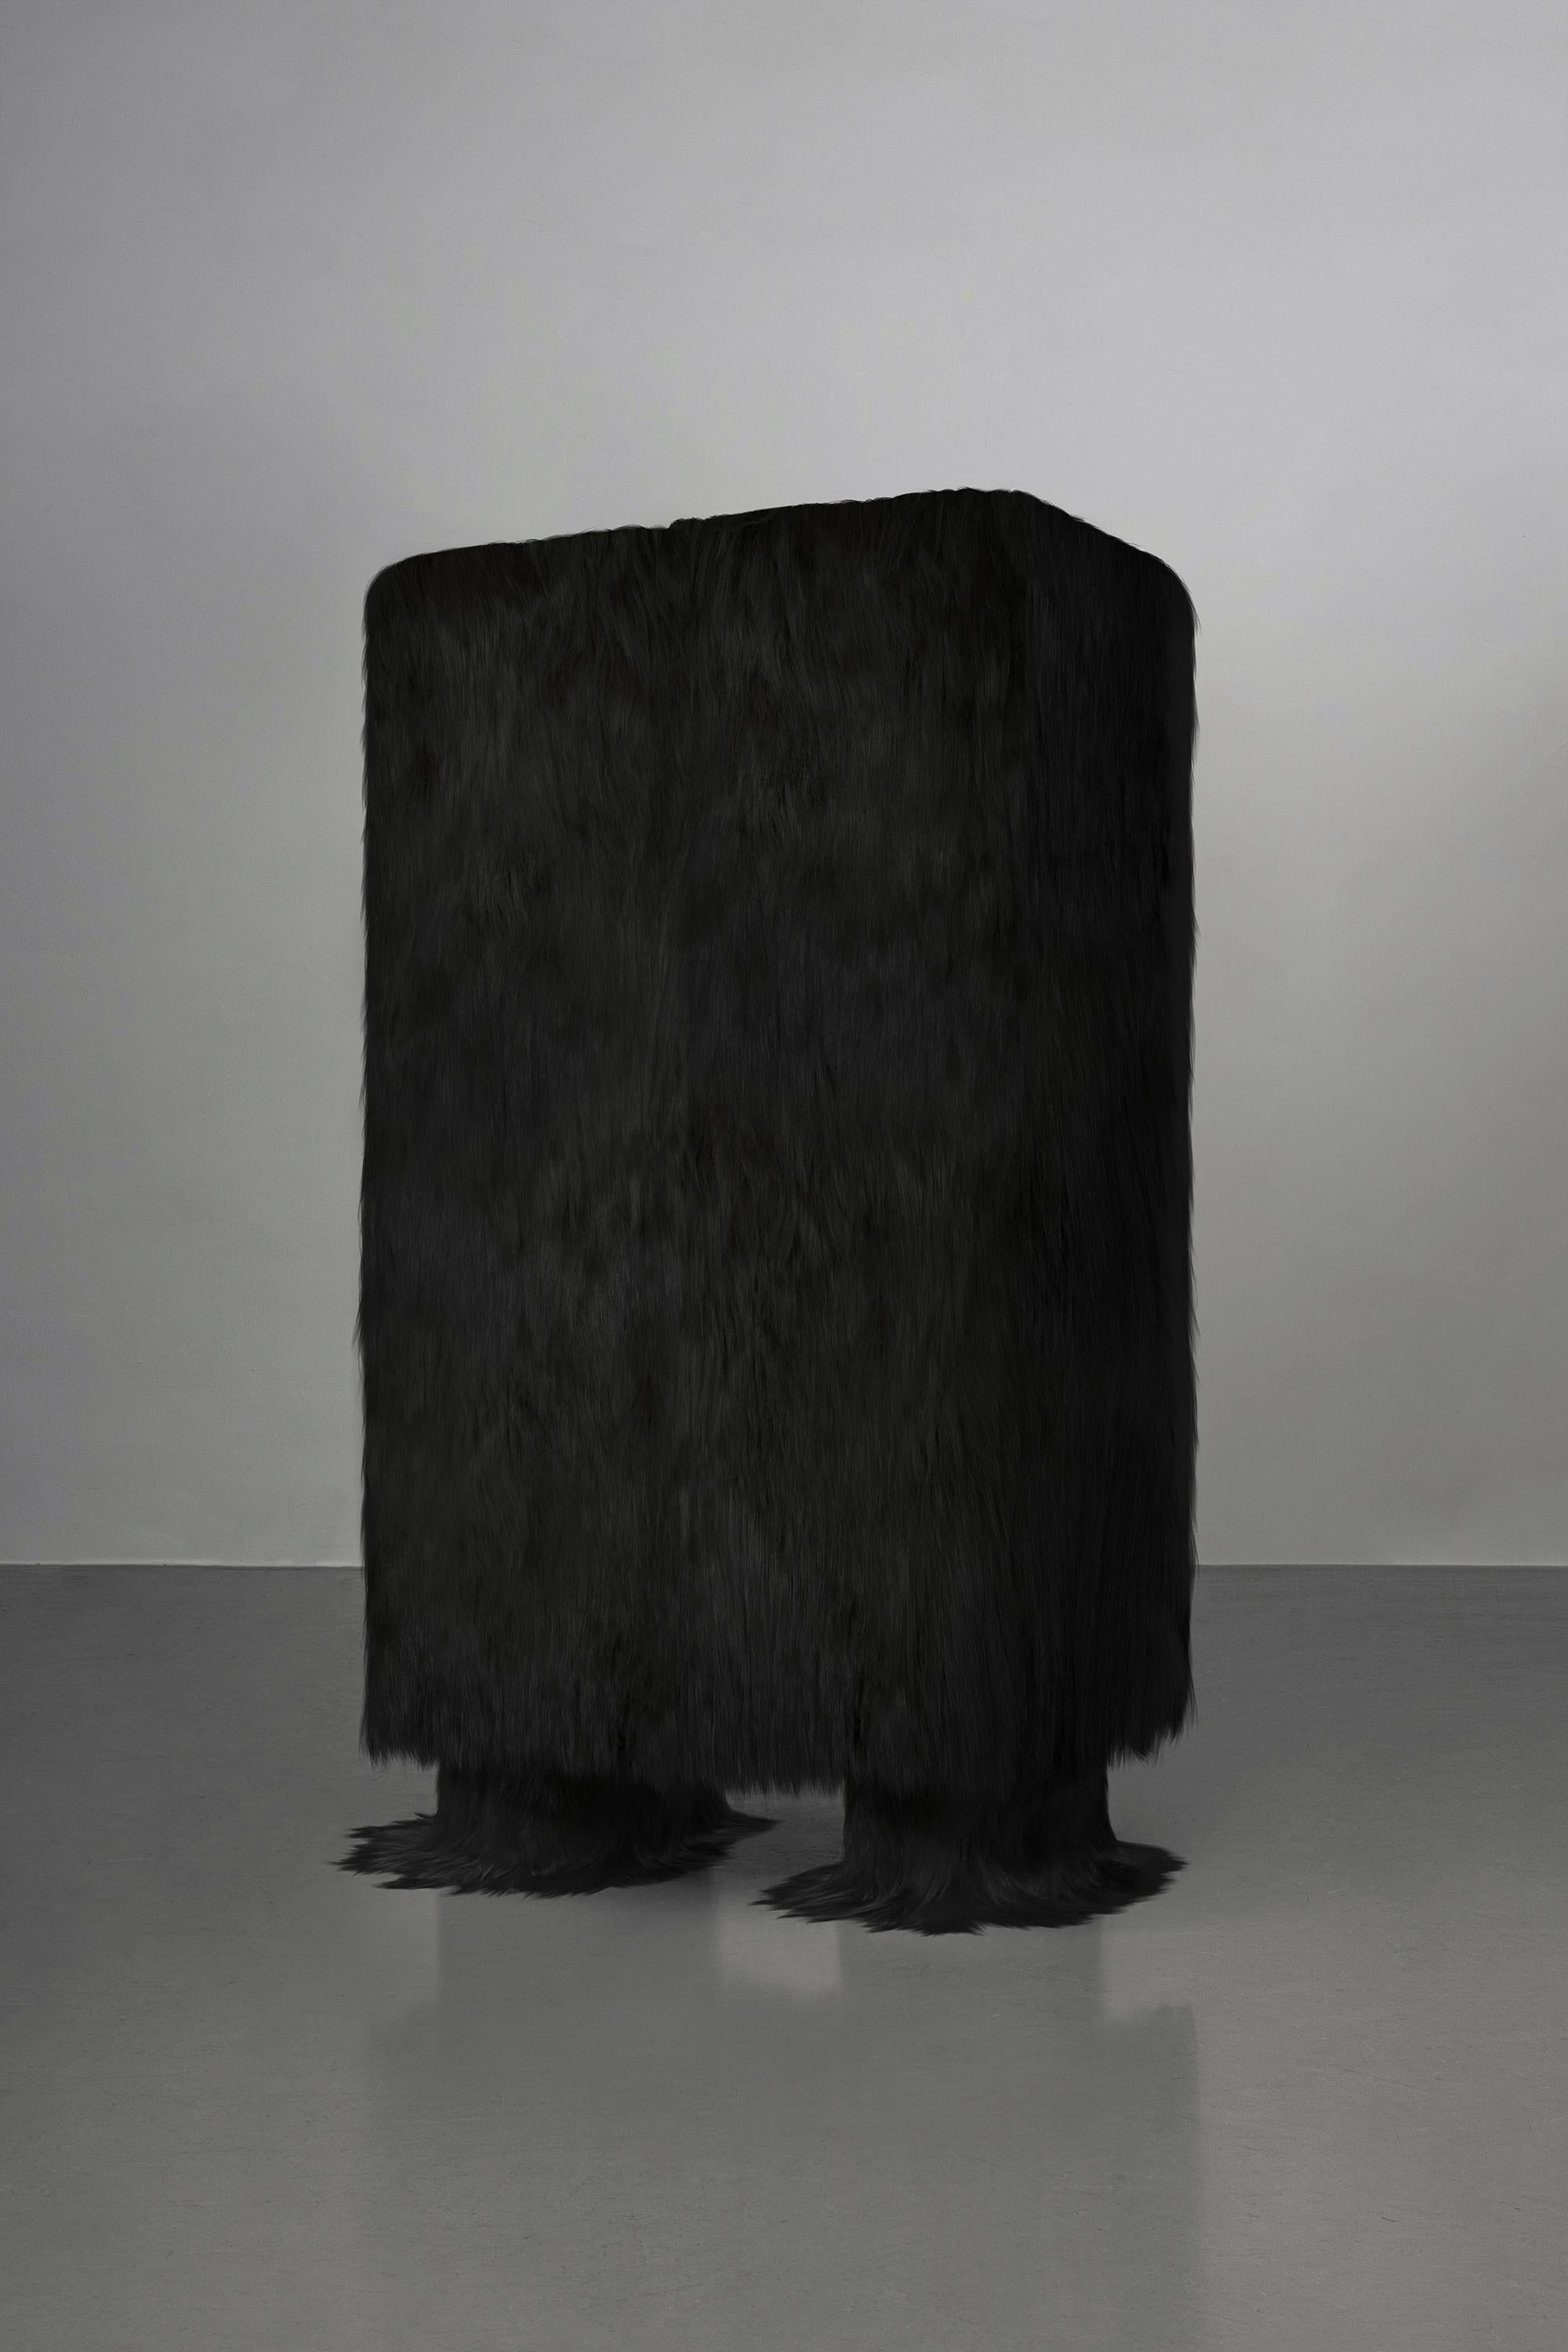 Raw Cabinet by Atelier V&F
Limited Edition Of 8+2AP Pieces.
Dimensions: D 55.5 x W 100 x H 190 cm.
Materials: Goatskin offcuts and suede.

Inspired by the earth goddess Gaia,「Revelation of Gaia」aims to explore the mighty but soft inner power and to